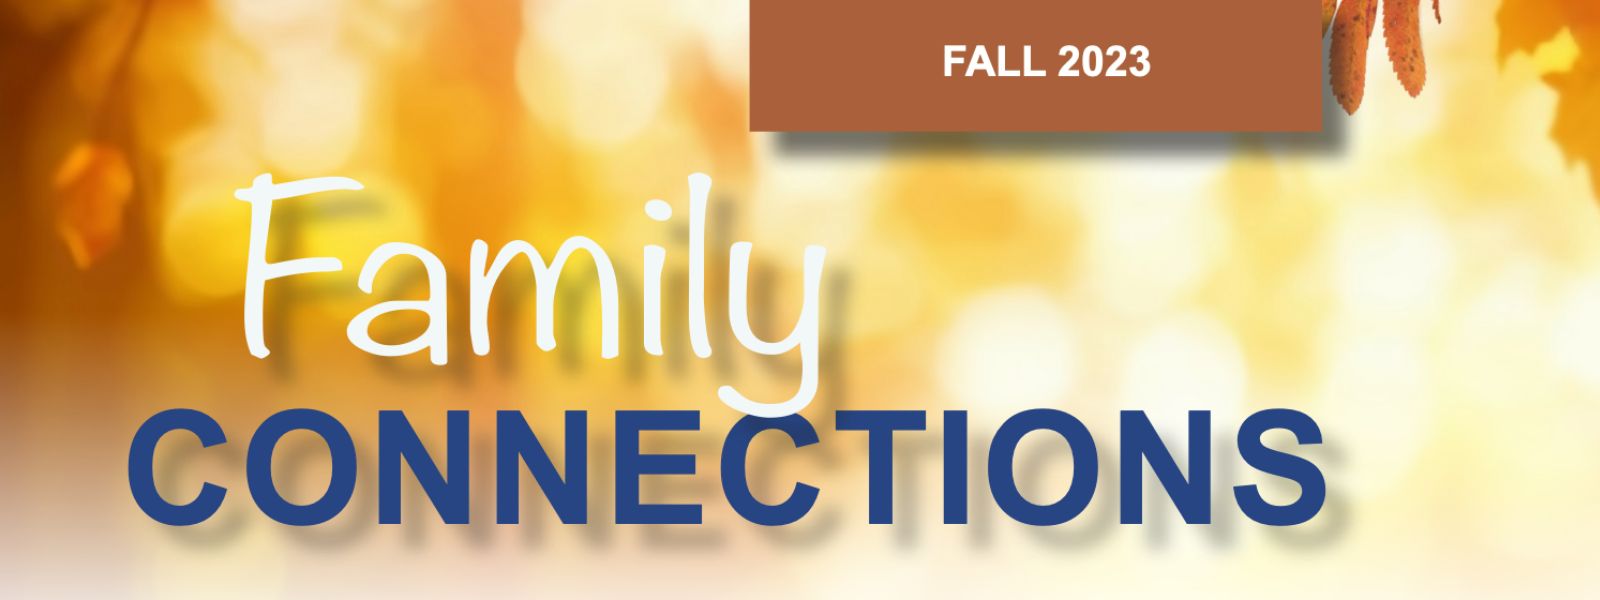 Family Connections Newsletter